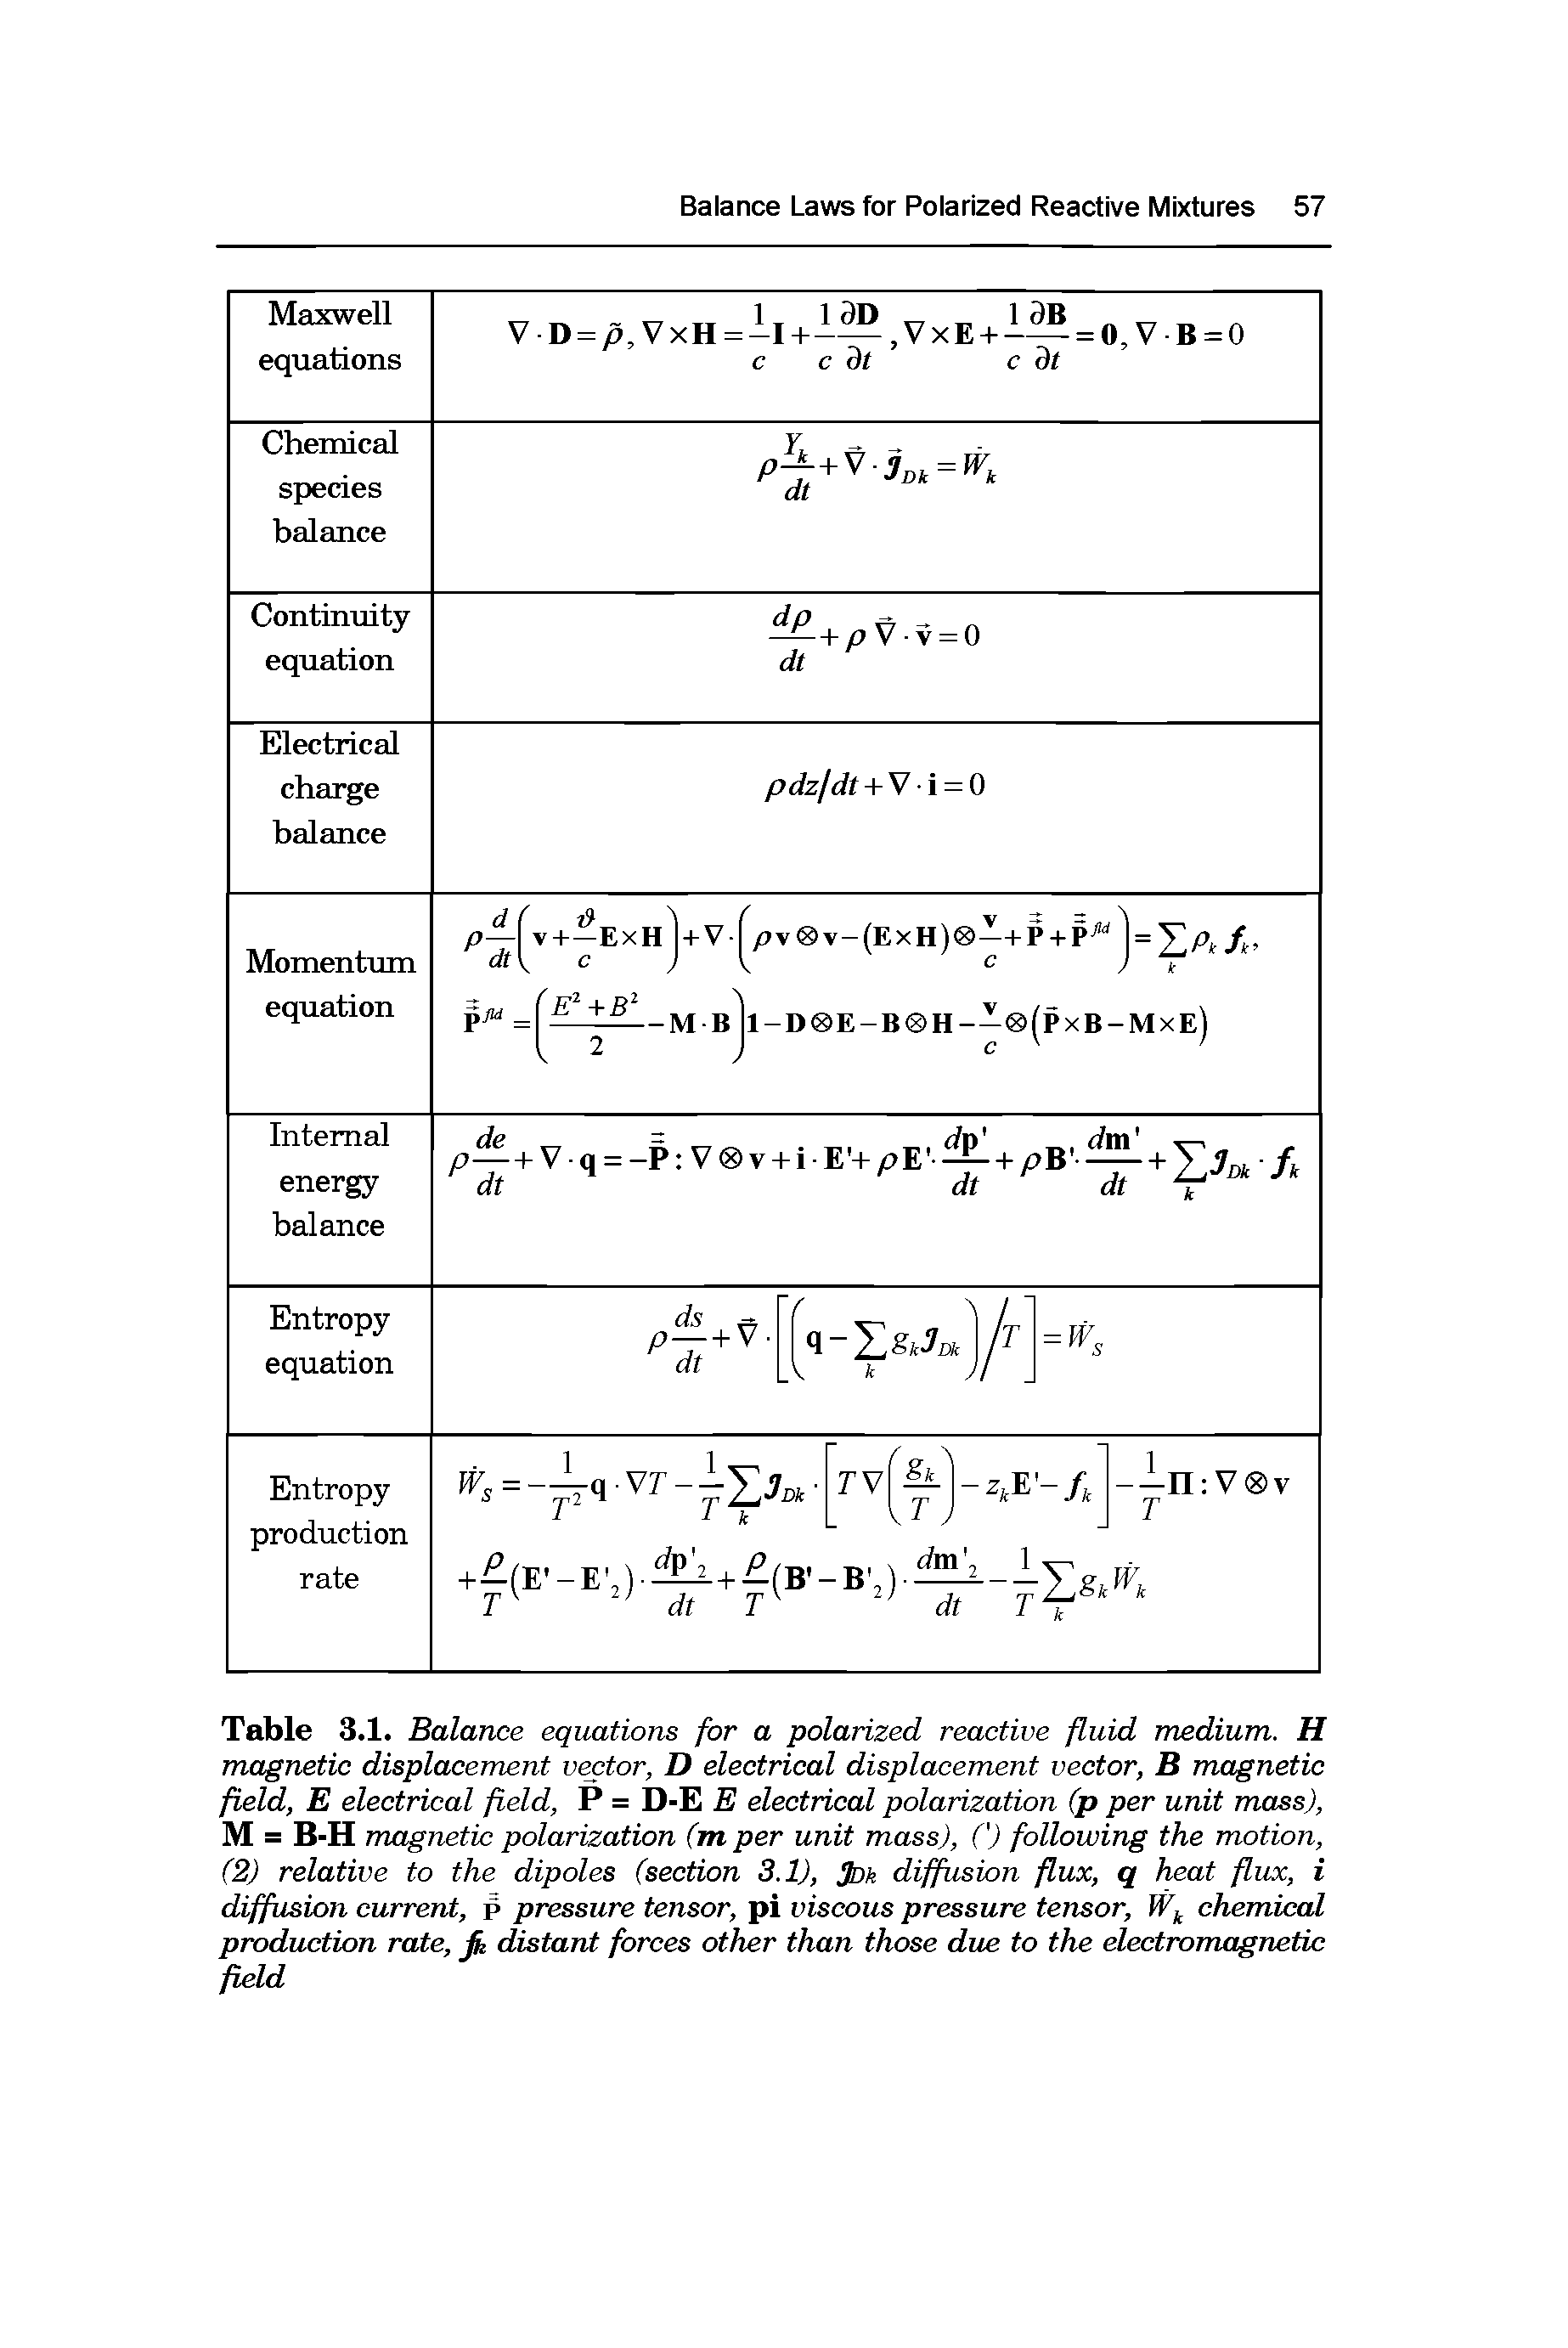 Table 3.1. Balance equations for a polarized reactive fluid medium. H magnetic displacement vector, D electrical displacement vector, B magnetic field, E electrical field, P = D-E E electrical polarization (p per unit mass), M = B-H magnetic polarization (m per unit mass), ( ) following the motion, (2) relative to the dipoles (section 3.1), Jok diffusion flux, q heat flux, i diffusion current, p pressure tensor, pi viscous pressure tensor, chemical production rode, fi distant forces other than those due to the electromagnetic field...